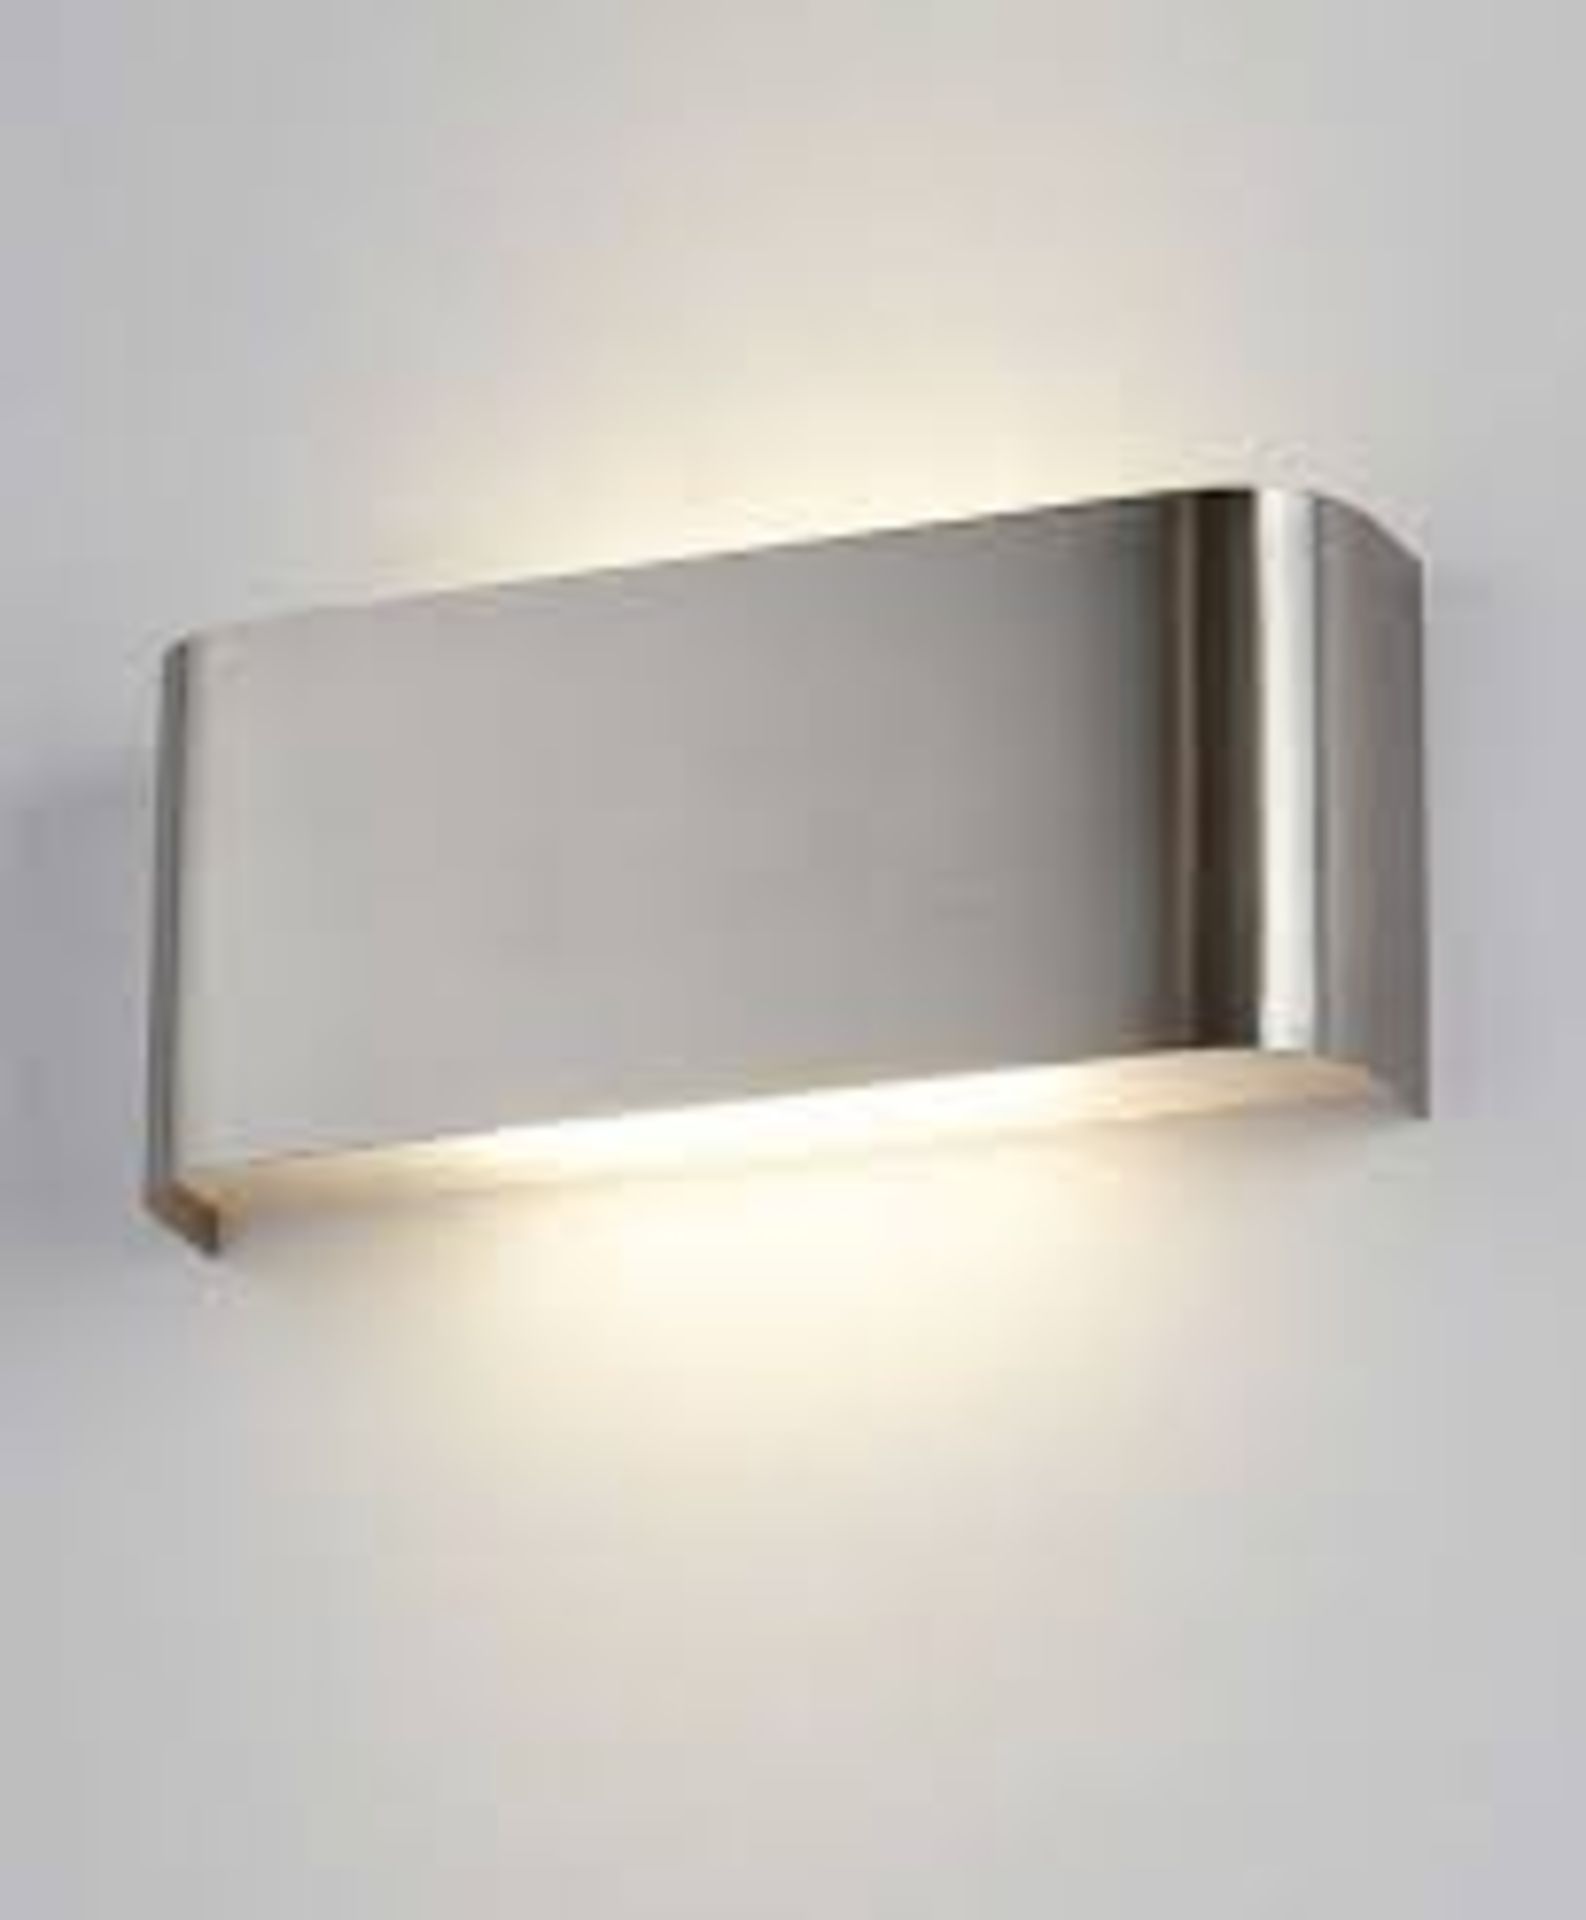 1 x Searchlight Wall Up/downlight in a satin silver - Ref: 1953SS - New Boxed - RRP: £105.00(each) - Image 3 of 4